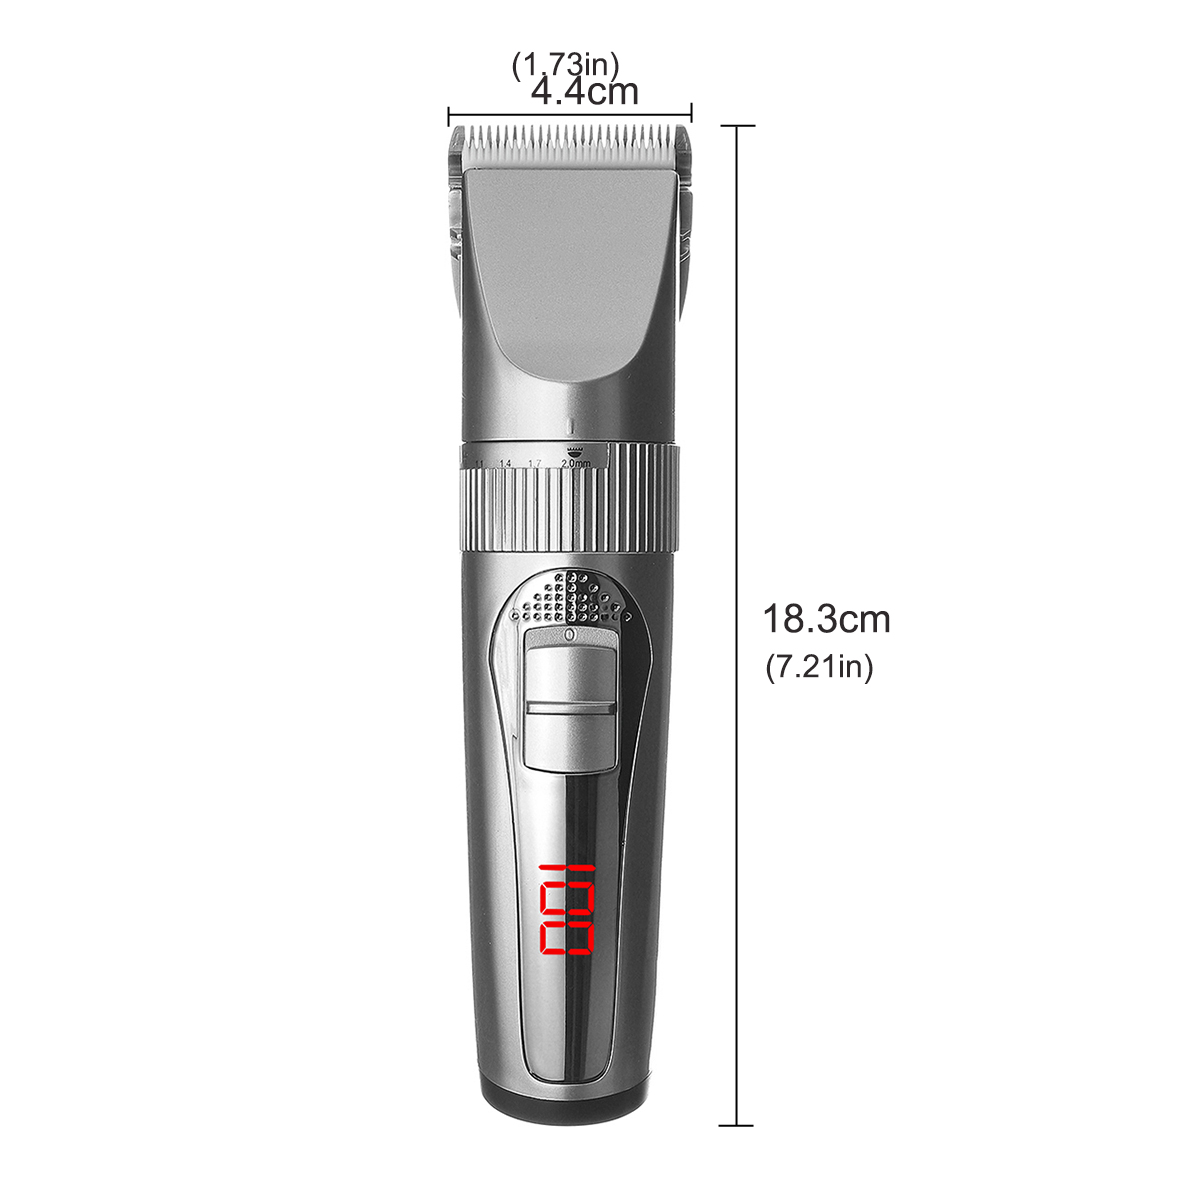 Men's Electric Digital display Hair Clipper USB Charging Hair Shaver W/ 4 Limit Combs